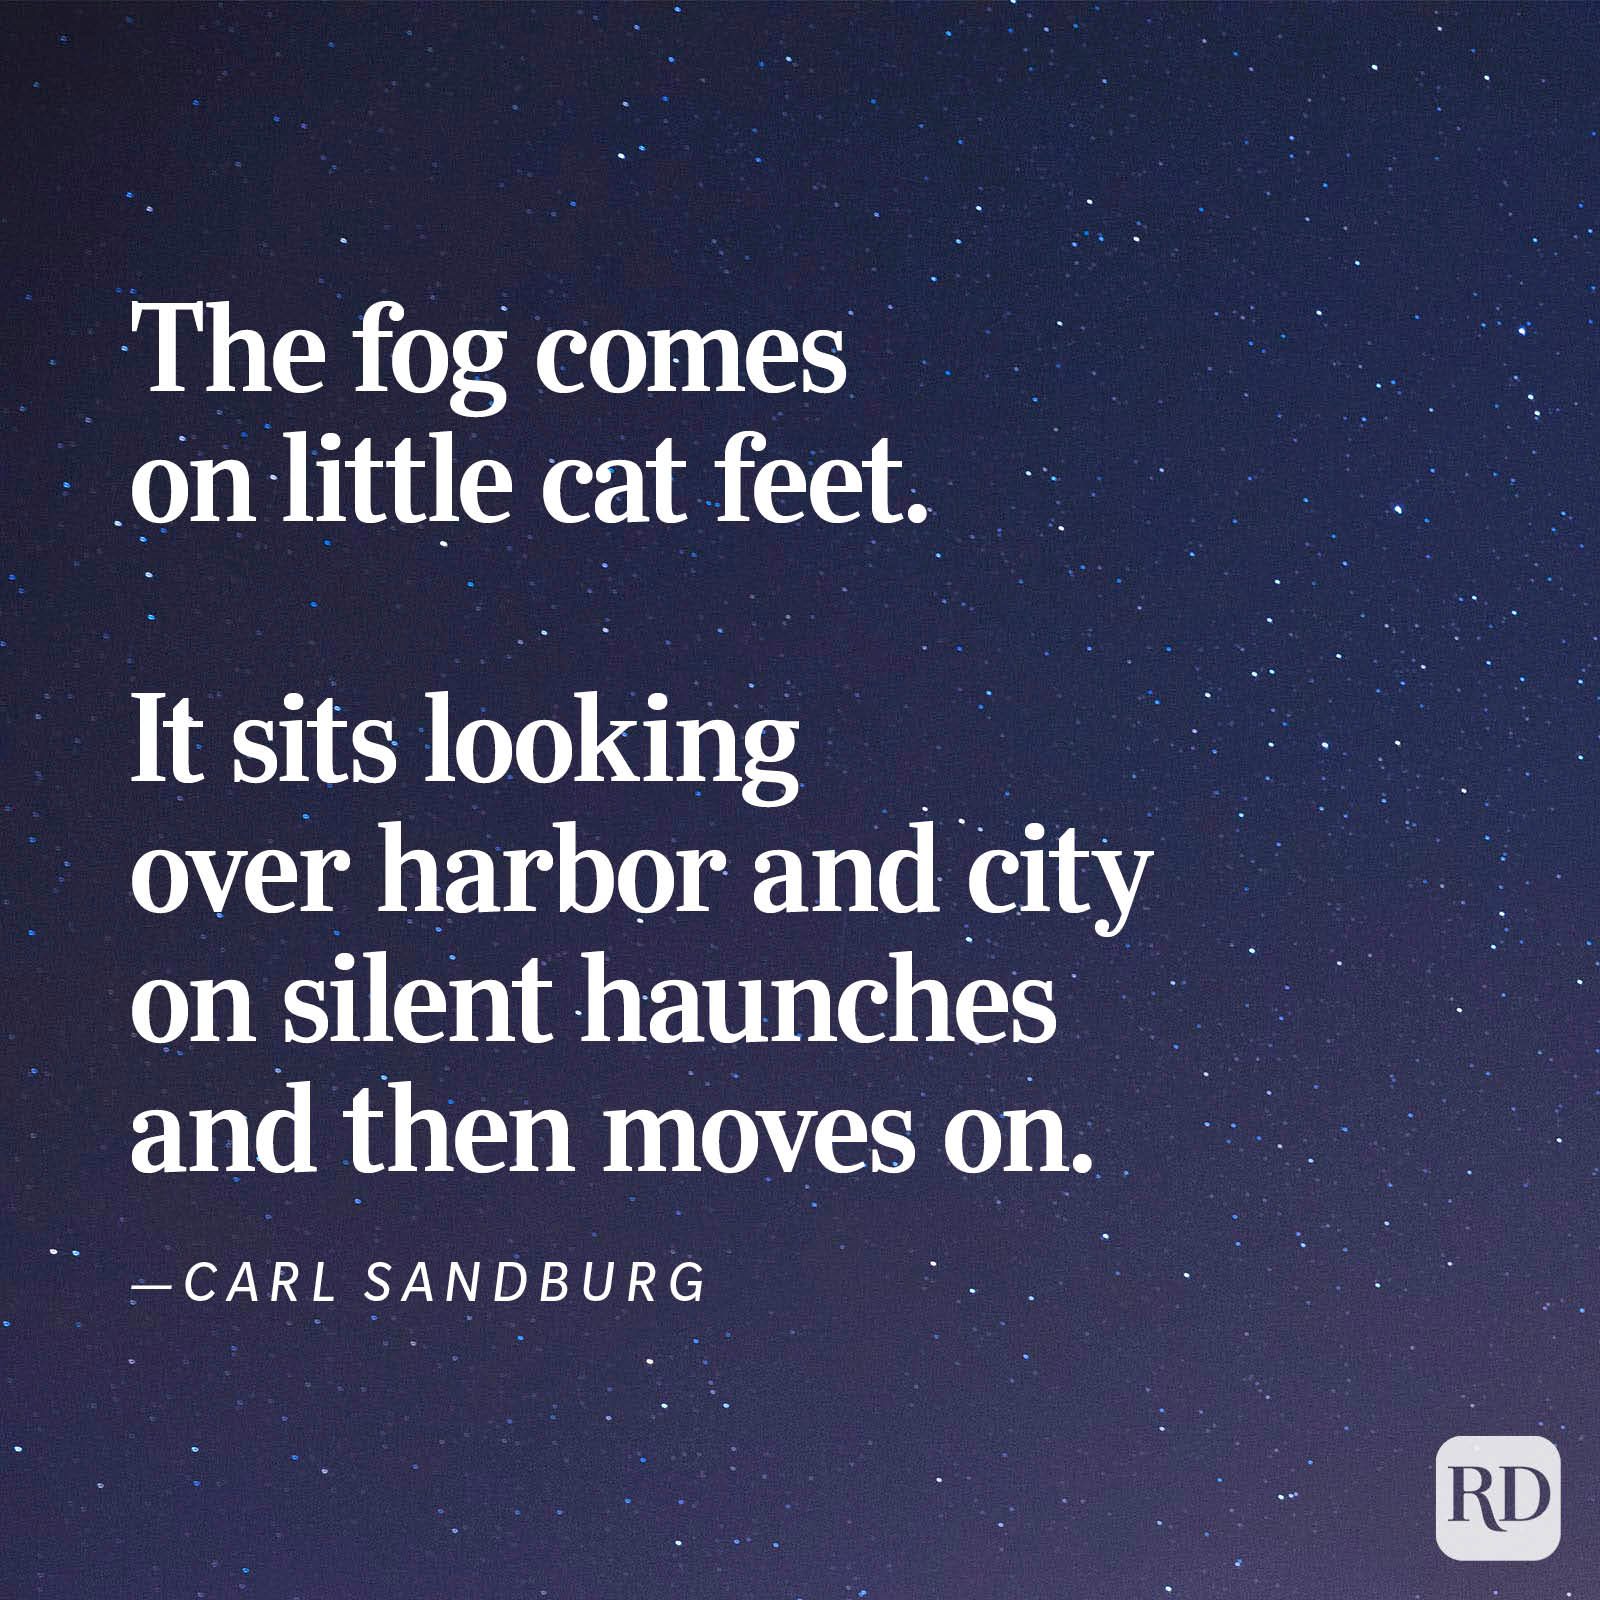 35 Poems About Nature That Highlight the Beauty of Our World